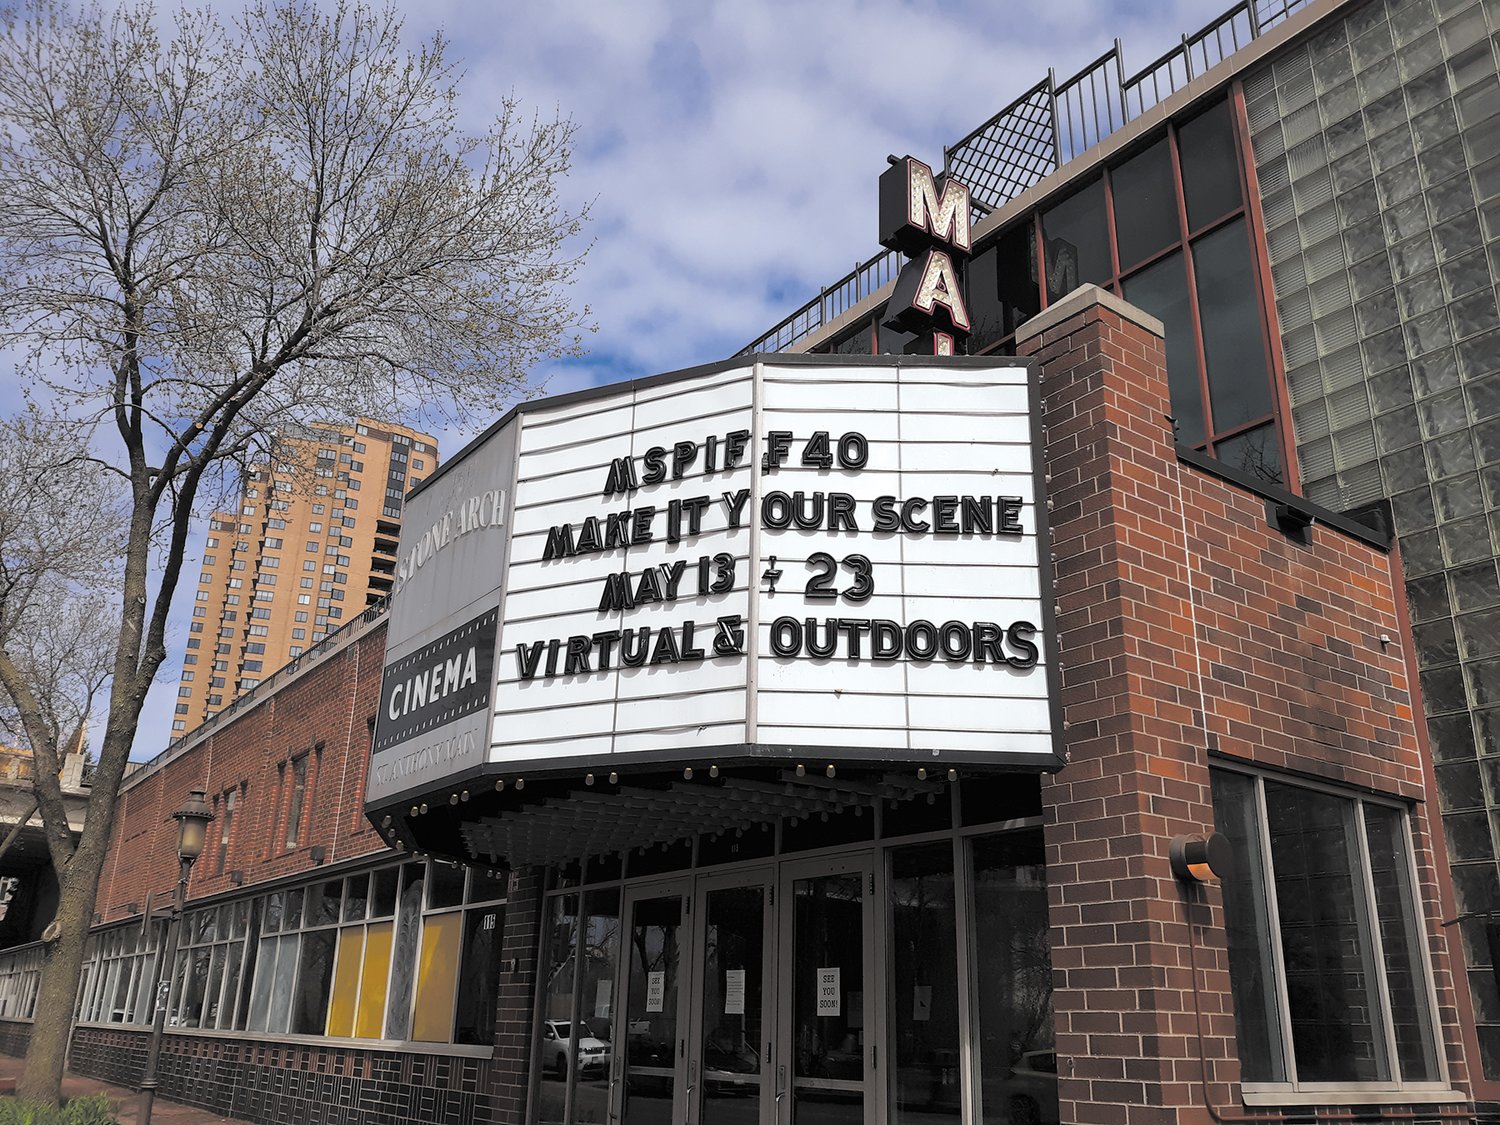 MSPIFF40, as it is being called, is marking its 40th anniversary. “I think it’s a milestone that we have been able to make it and actually host the 40th festival in the climate that we are now in,” said Susan Smoluchowski, executive director of MSP Film Society, the parent organization of MSPIFF.